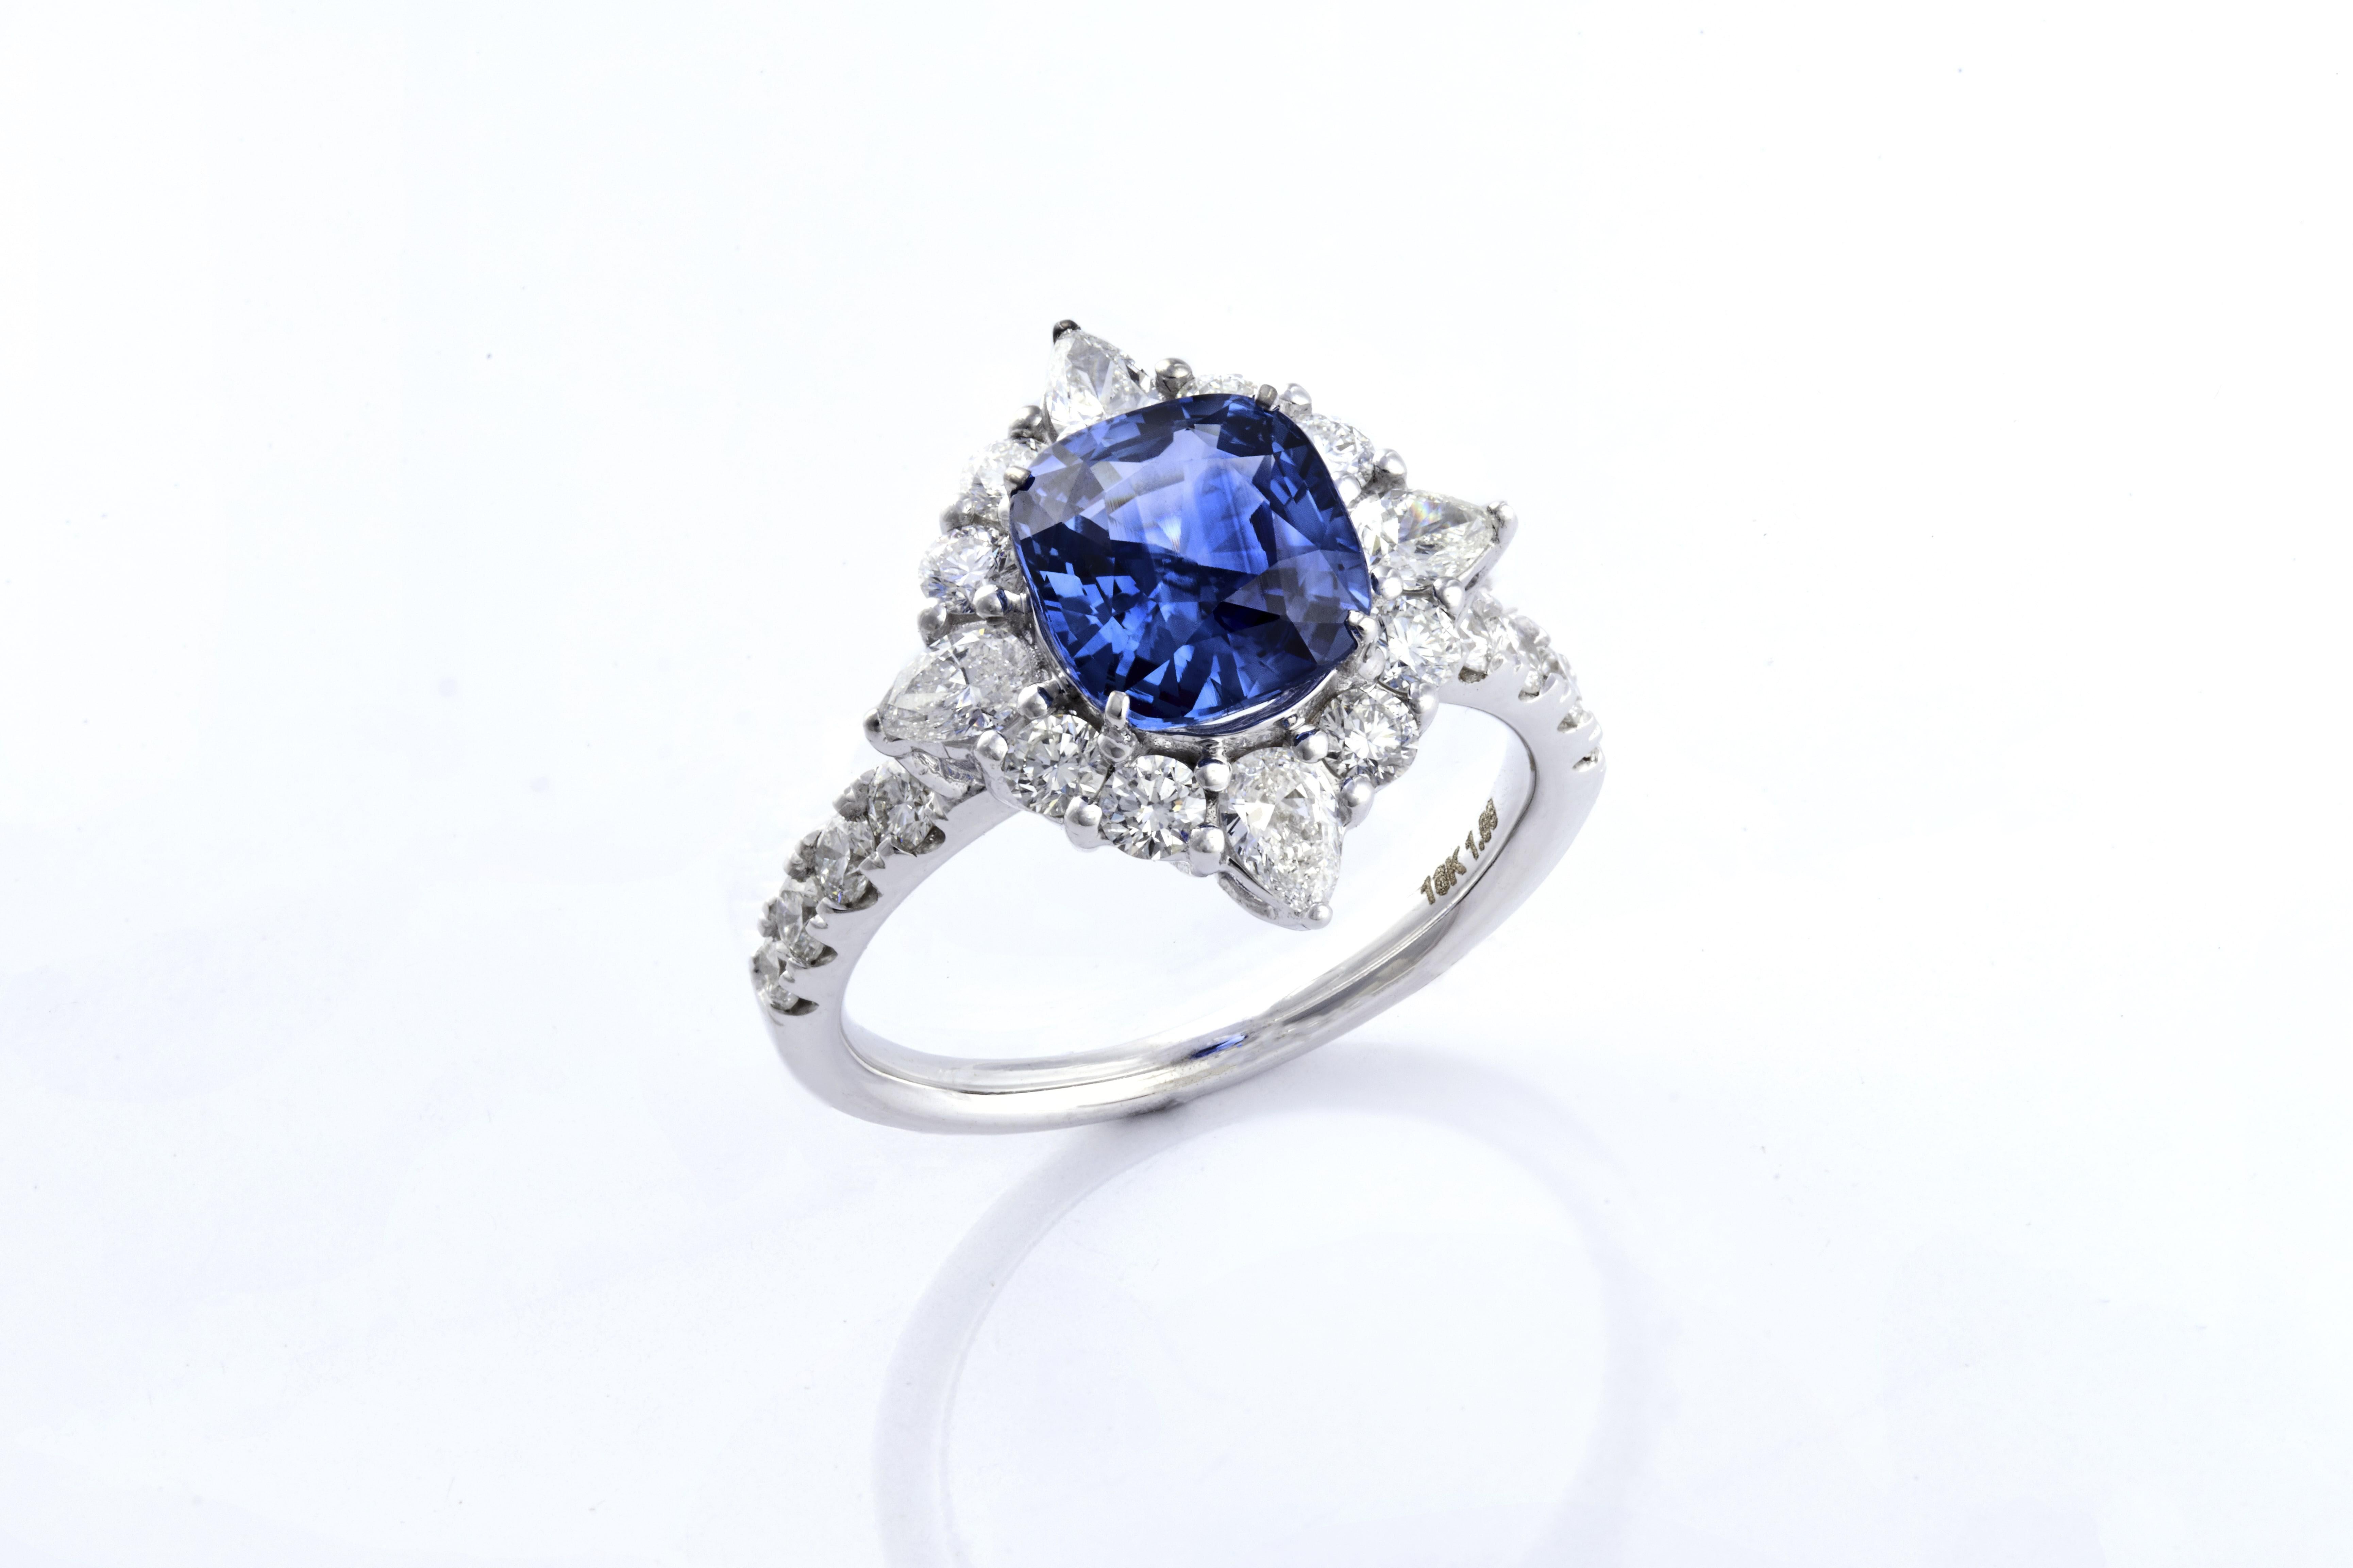 A Blue sapphire is regarded as a stone of mental focus and inner vision. Associated with deep spirituality and devotion, a Blue sapphire is thought to bring peace and contentment to one's soul, as well as trust in the fulfillment of his or her